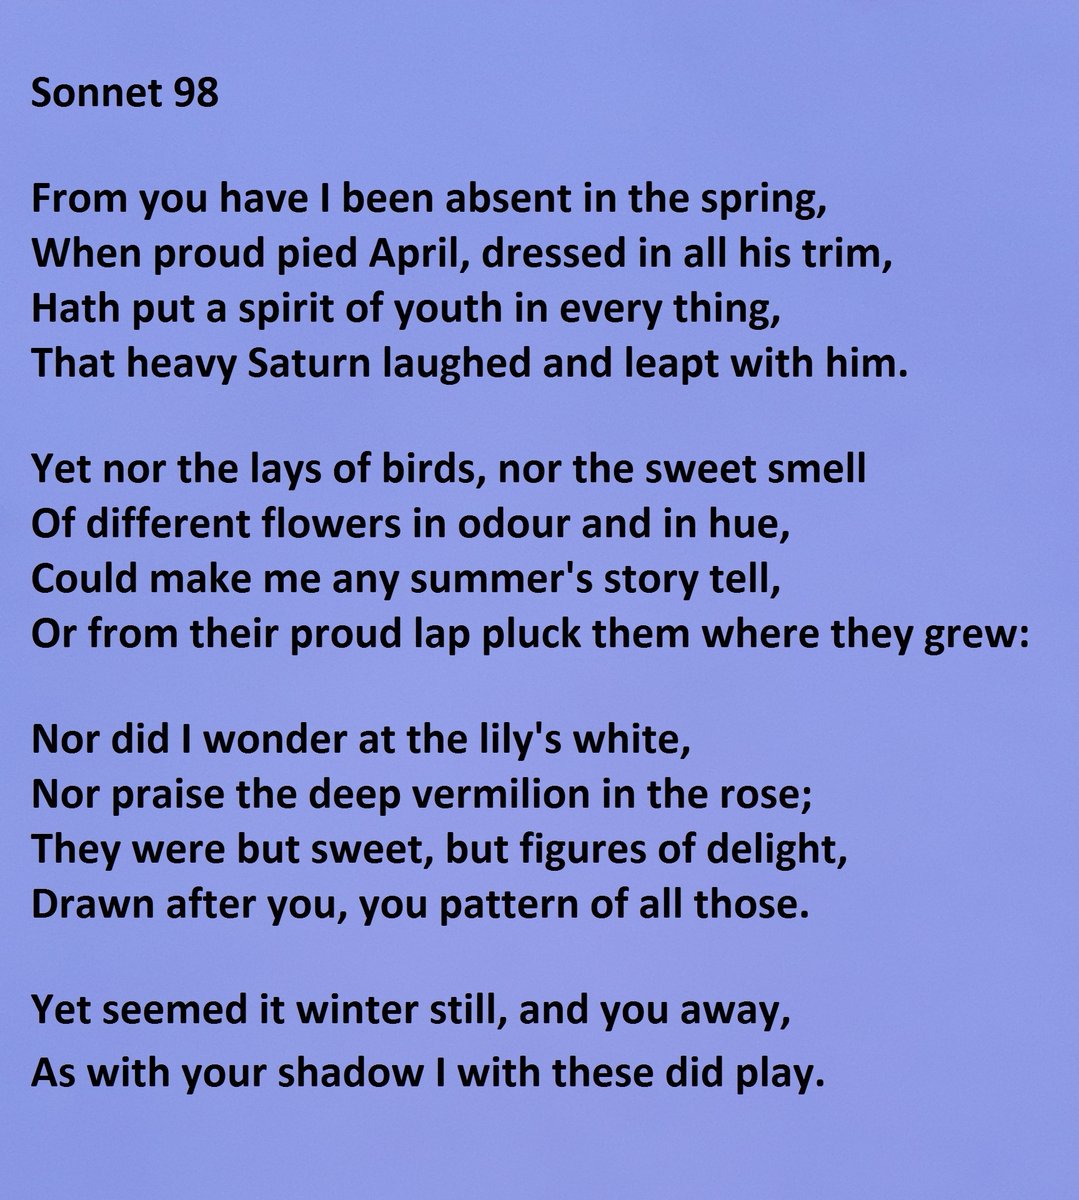 Sonnet 98 by William Shakespeare "From you have I been absent in the spring"